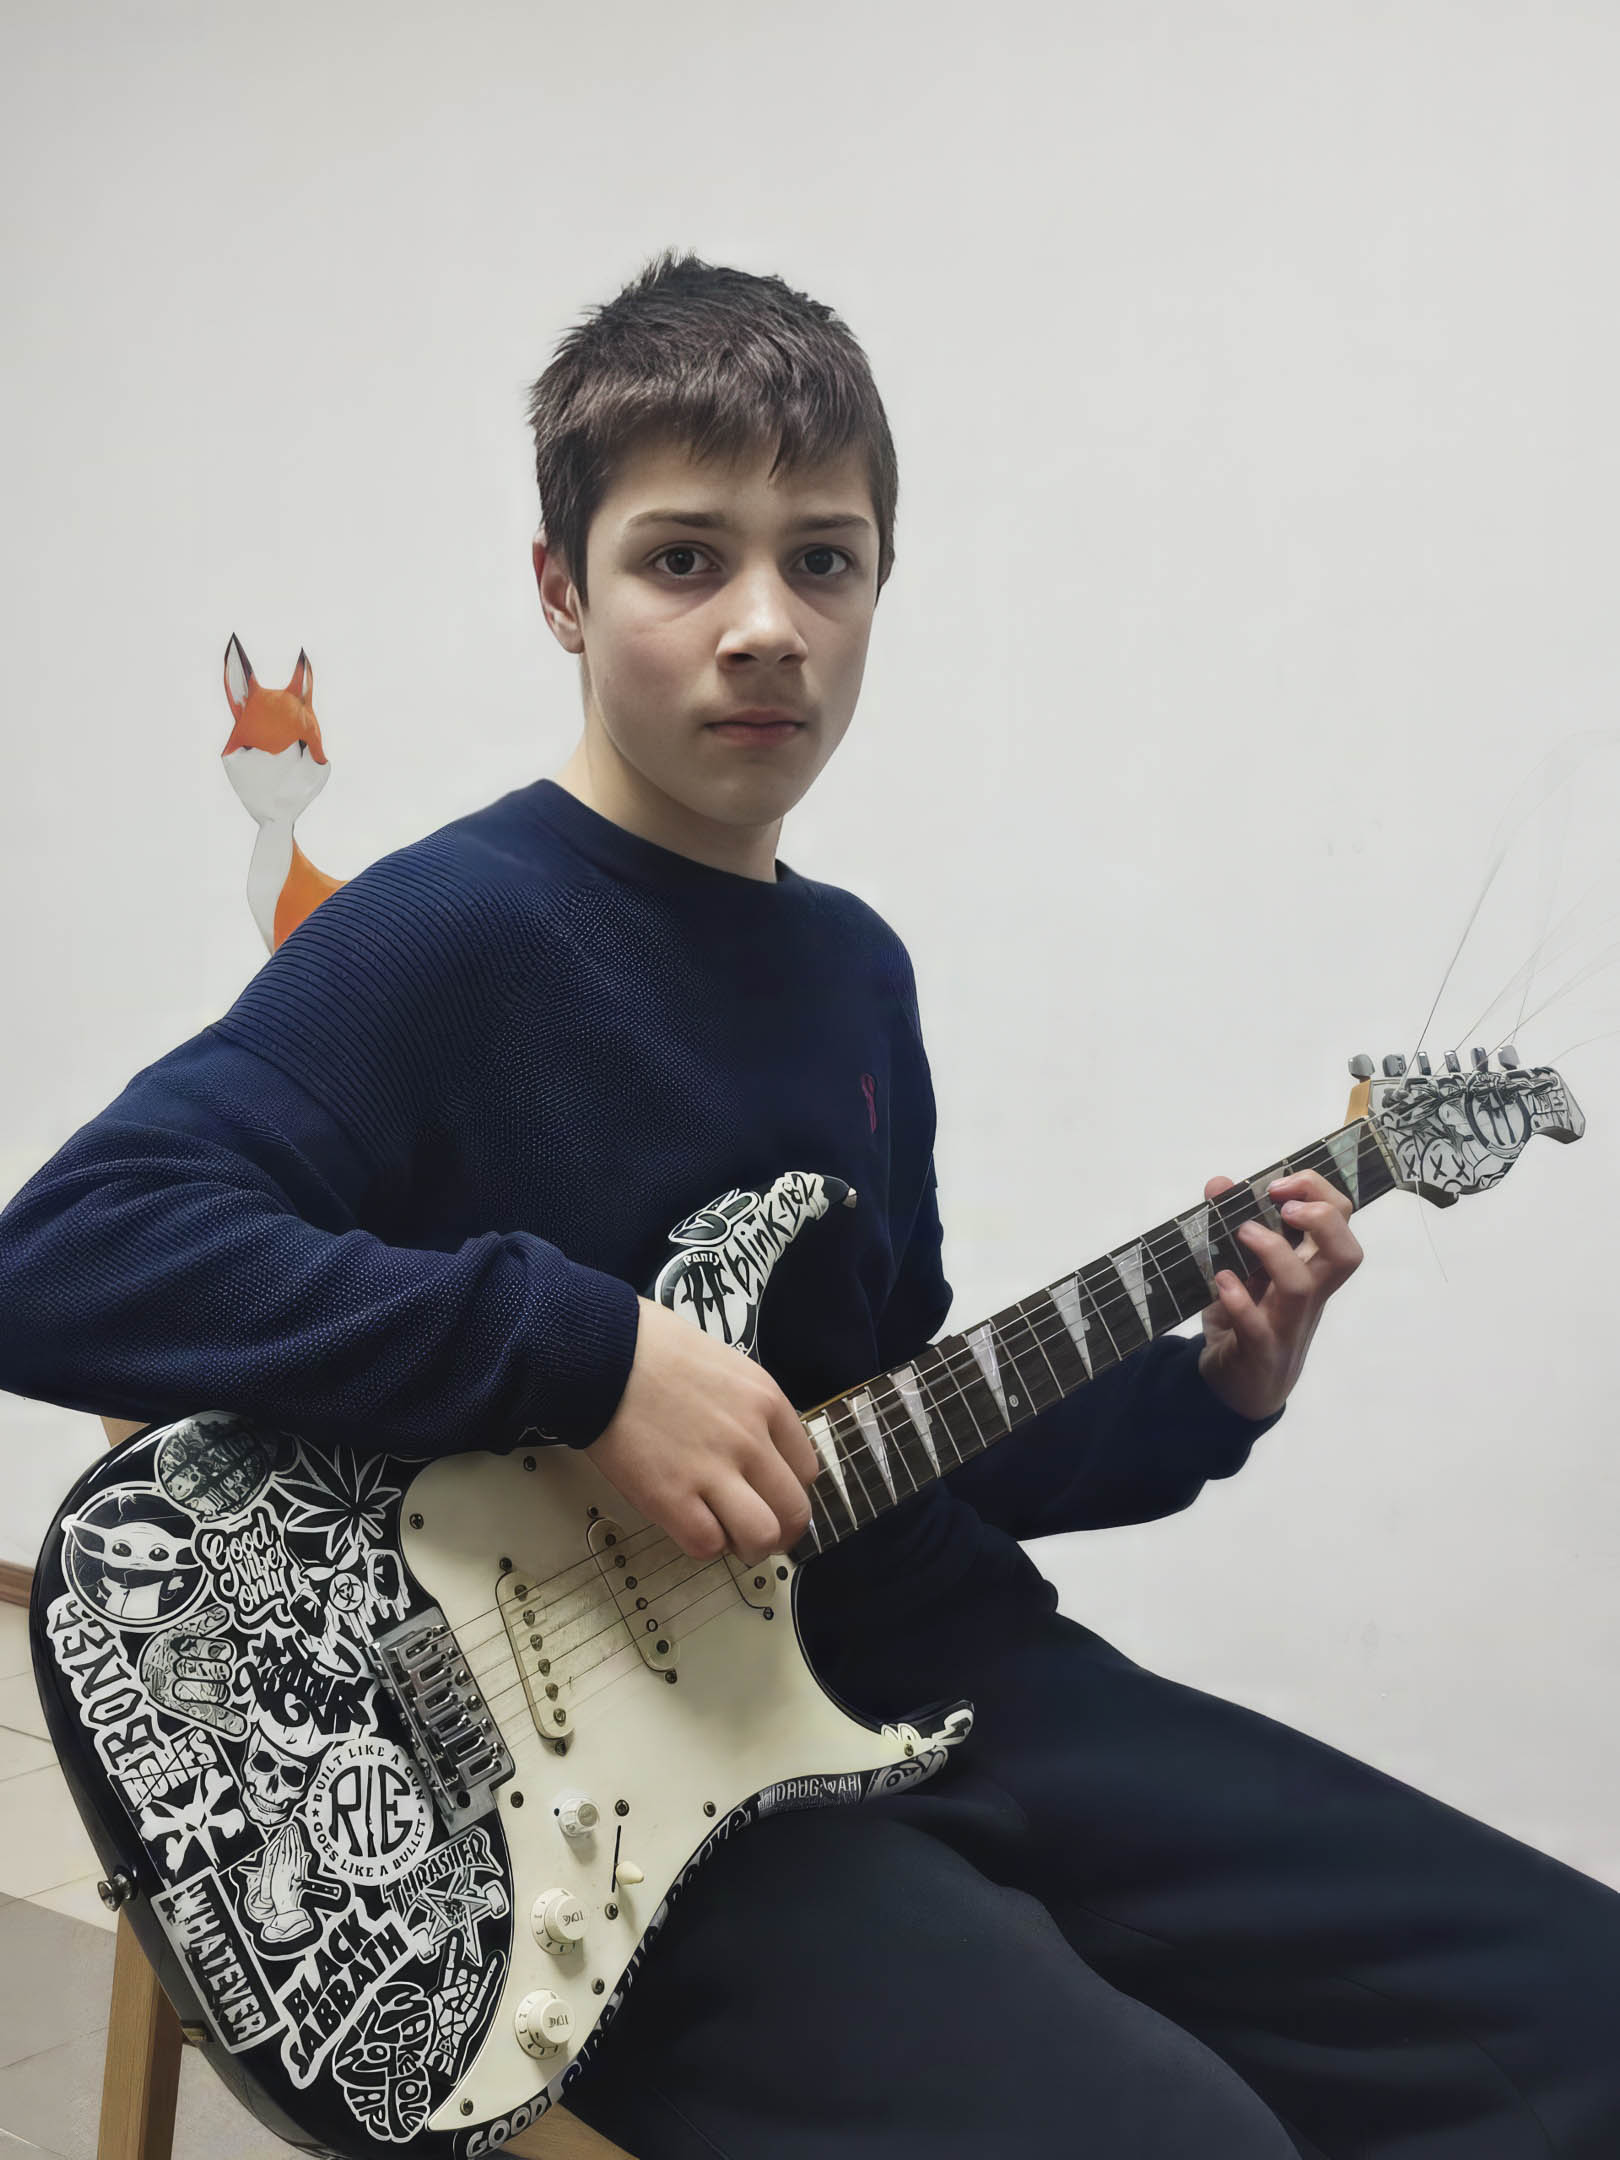 11-year-old Oleksiy from Mariupol